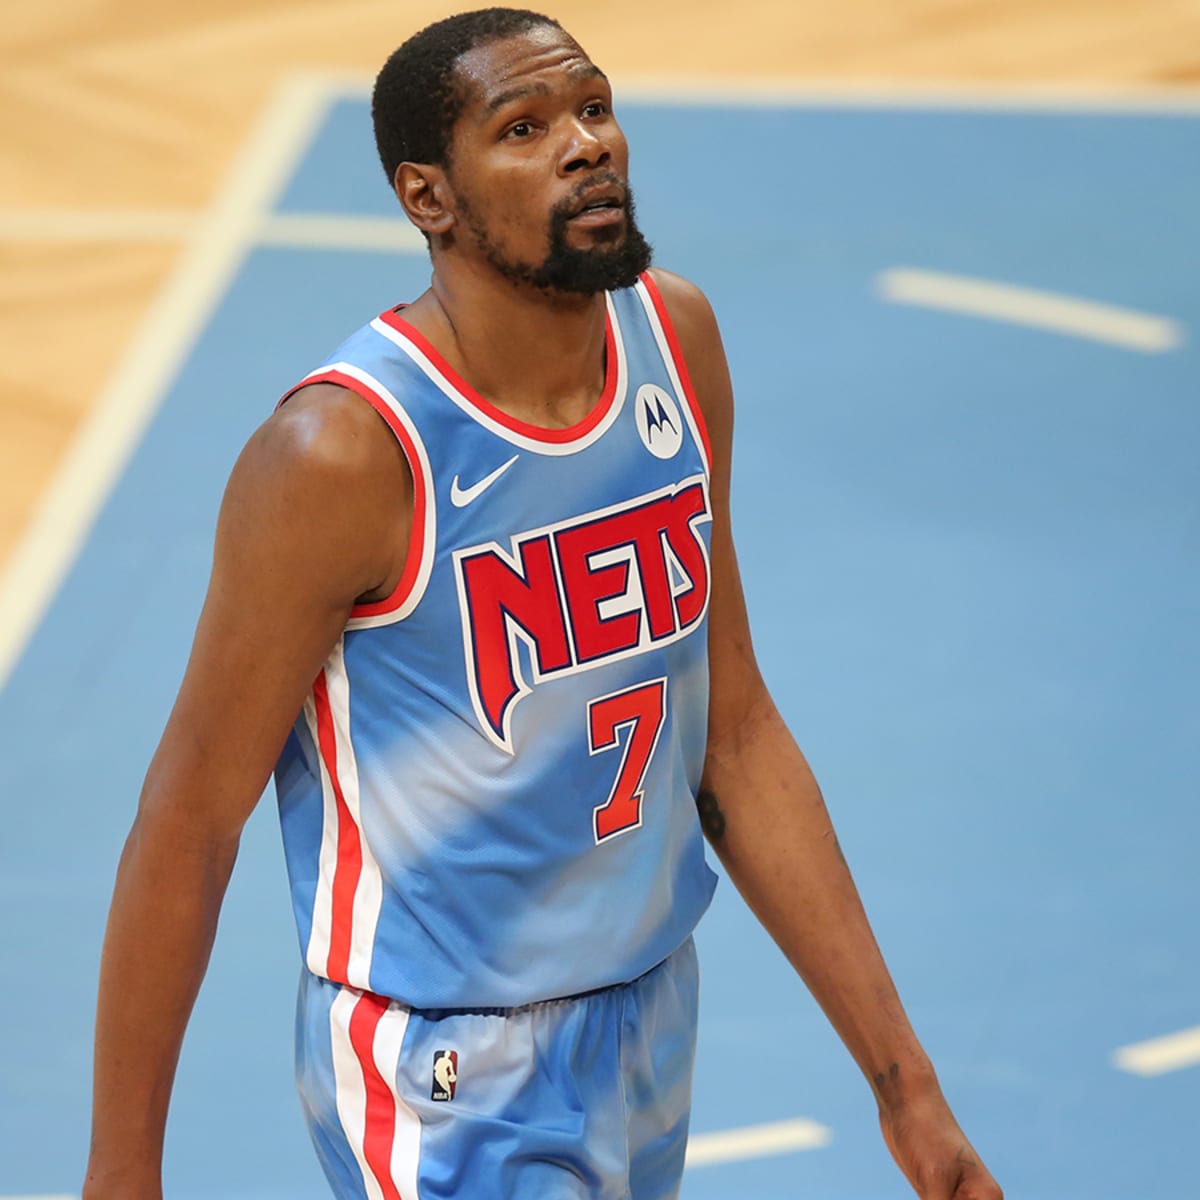 Detroit Pistons in Teal: In defense of 'ugly' jerseys - Detroit Bad Boys